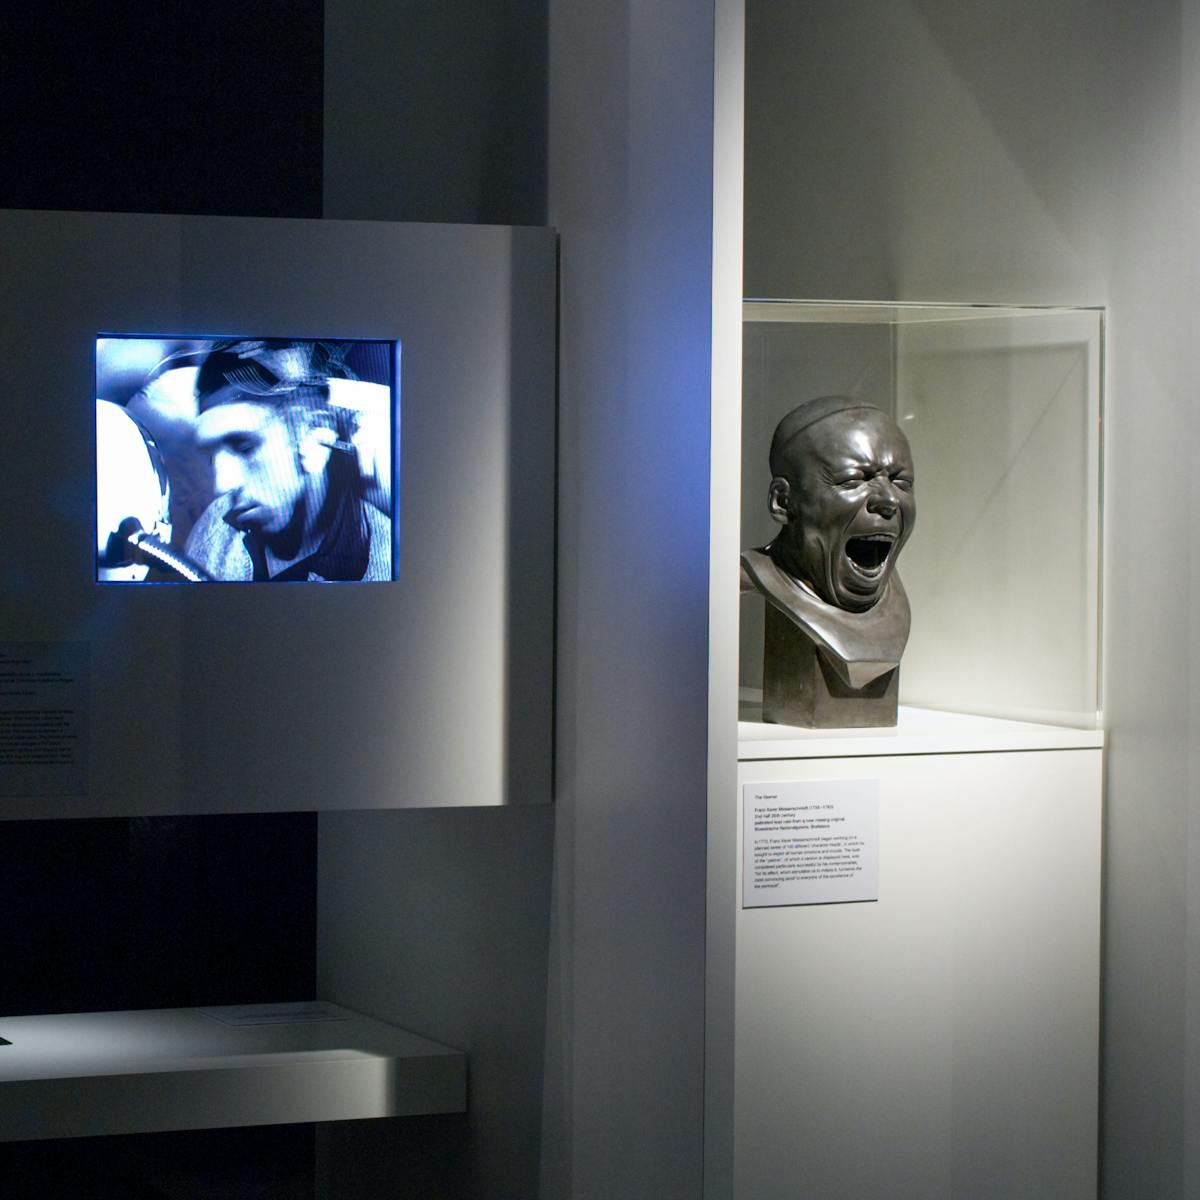 Photograph of some of the exhibits that formed part of the exhibition, Sleeping and Dreaming at Wellcome Collection.